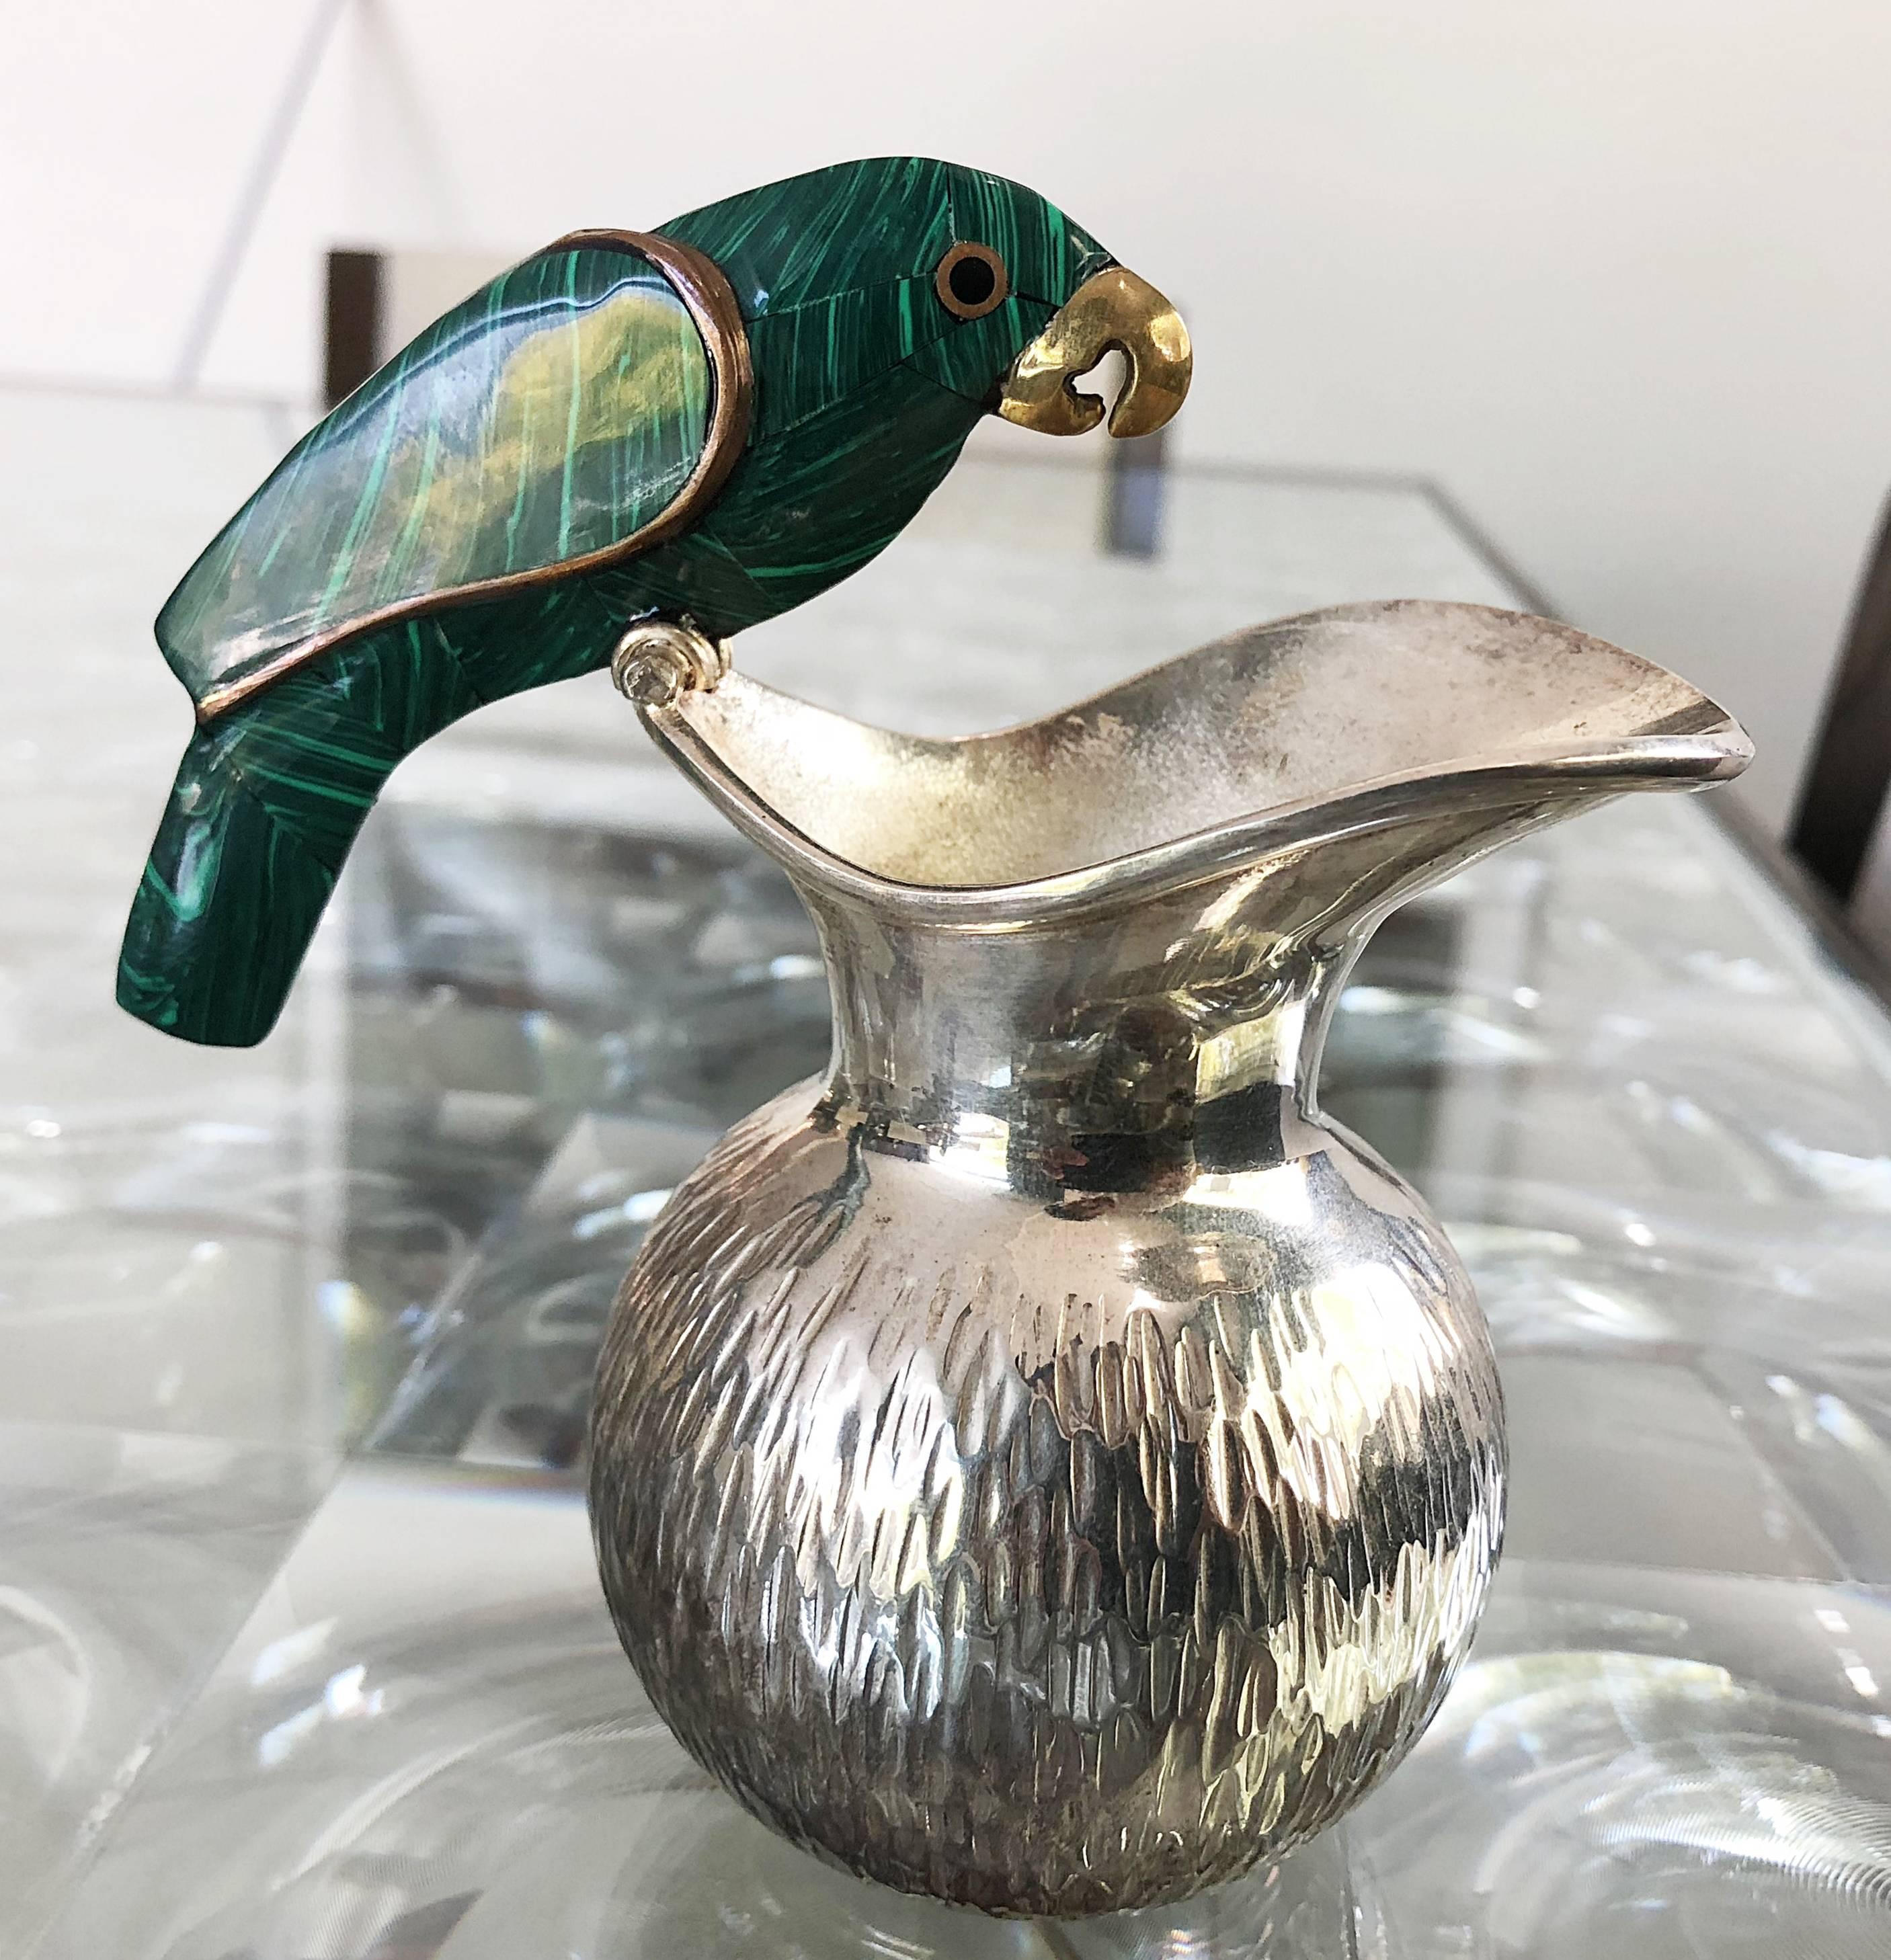 Vintage serving set in silver, malachite and brass by Los Fajardo of Taxco.
The creamer and sugar caddie are beautifully adorned with a parrot perching on the rim of the bowl and pitcher, the parrot is made out of malachite and brass and is in